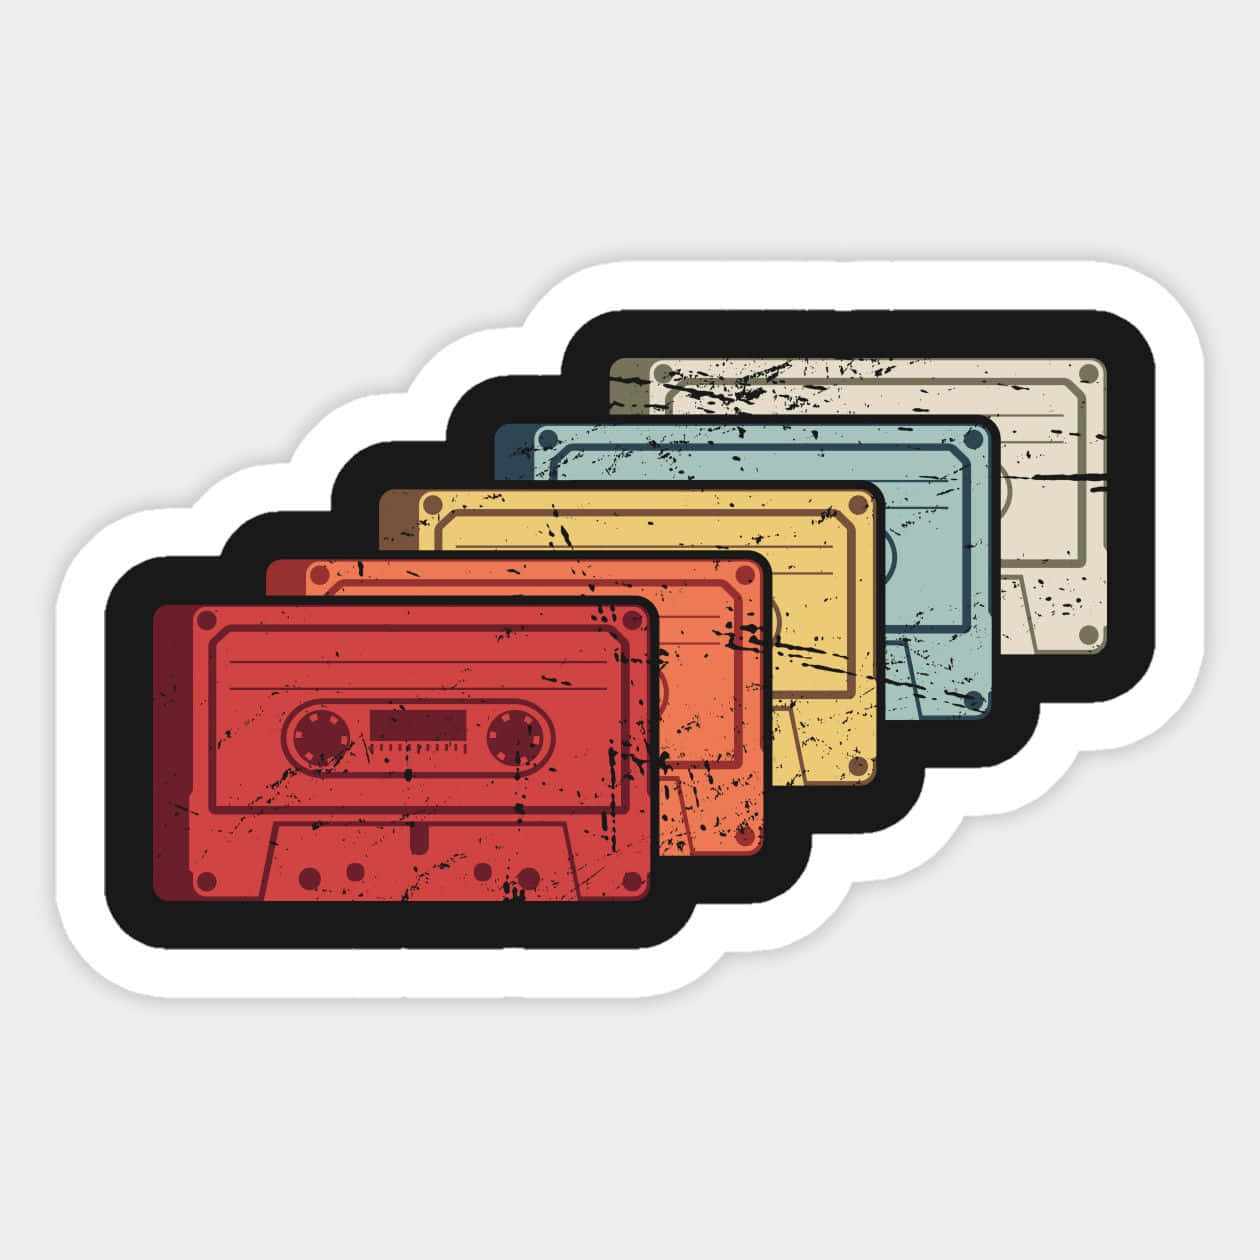 A Sticker With A Row Of Cassette Tapes